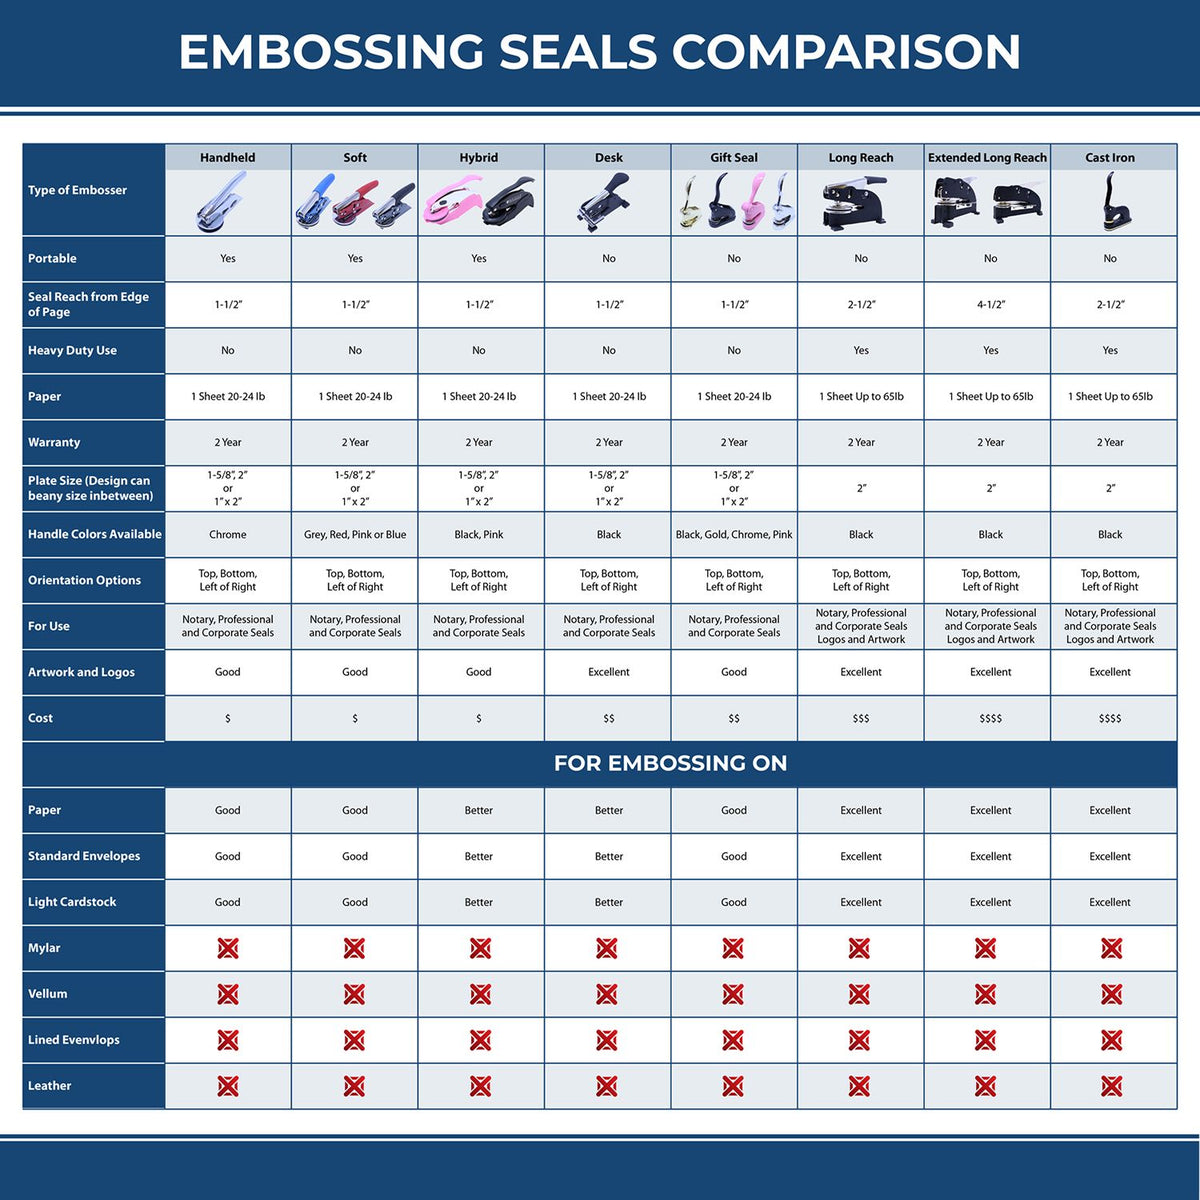 A comparison chart for the different types of mount models available for the Long Reach New Hampshire Geology Seal